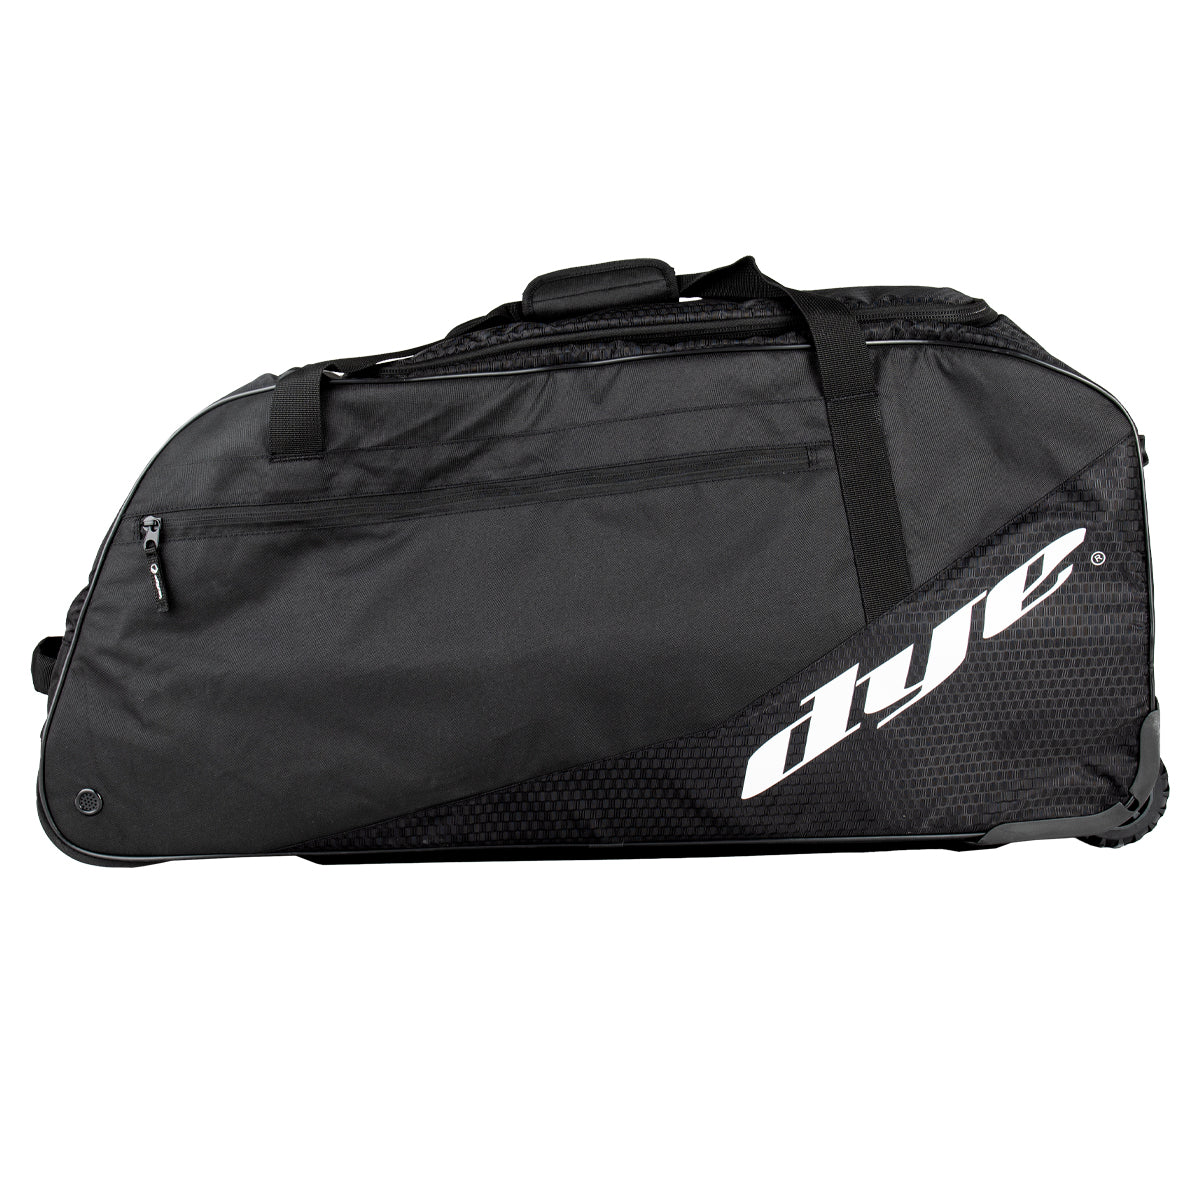 The Discovery Gear Bag 1.5 T